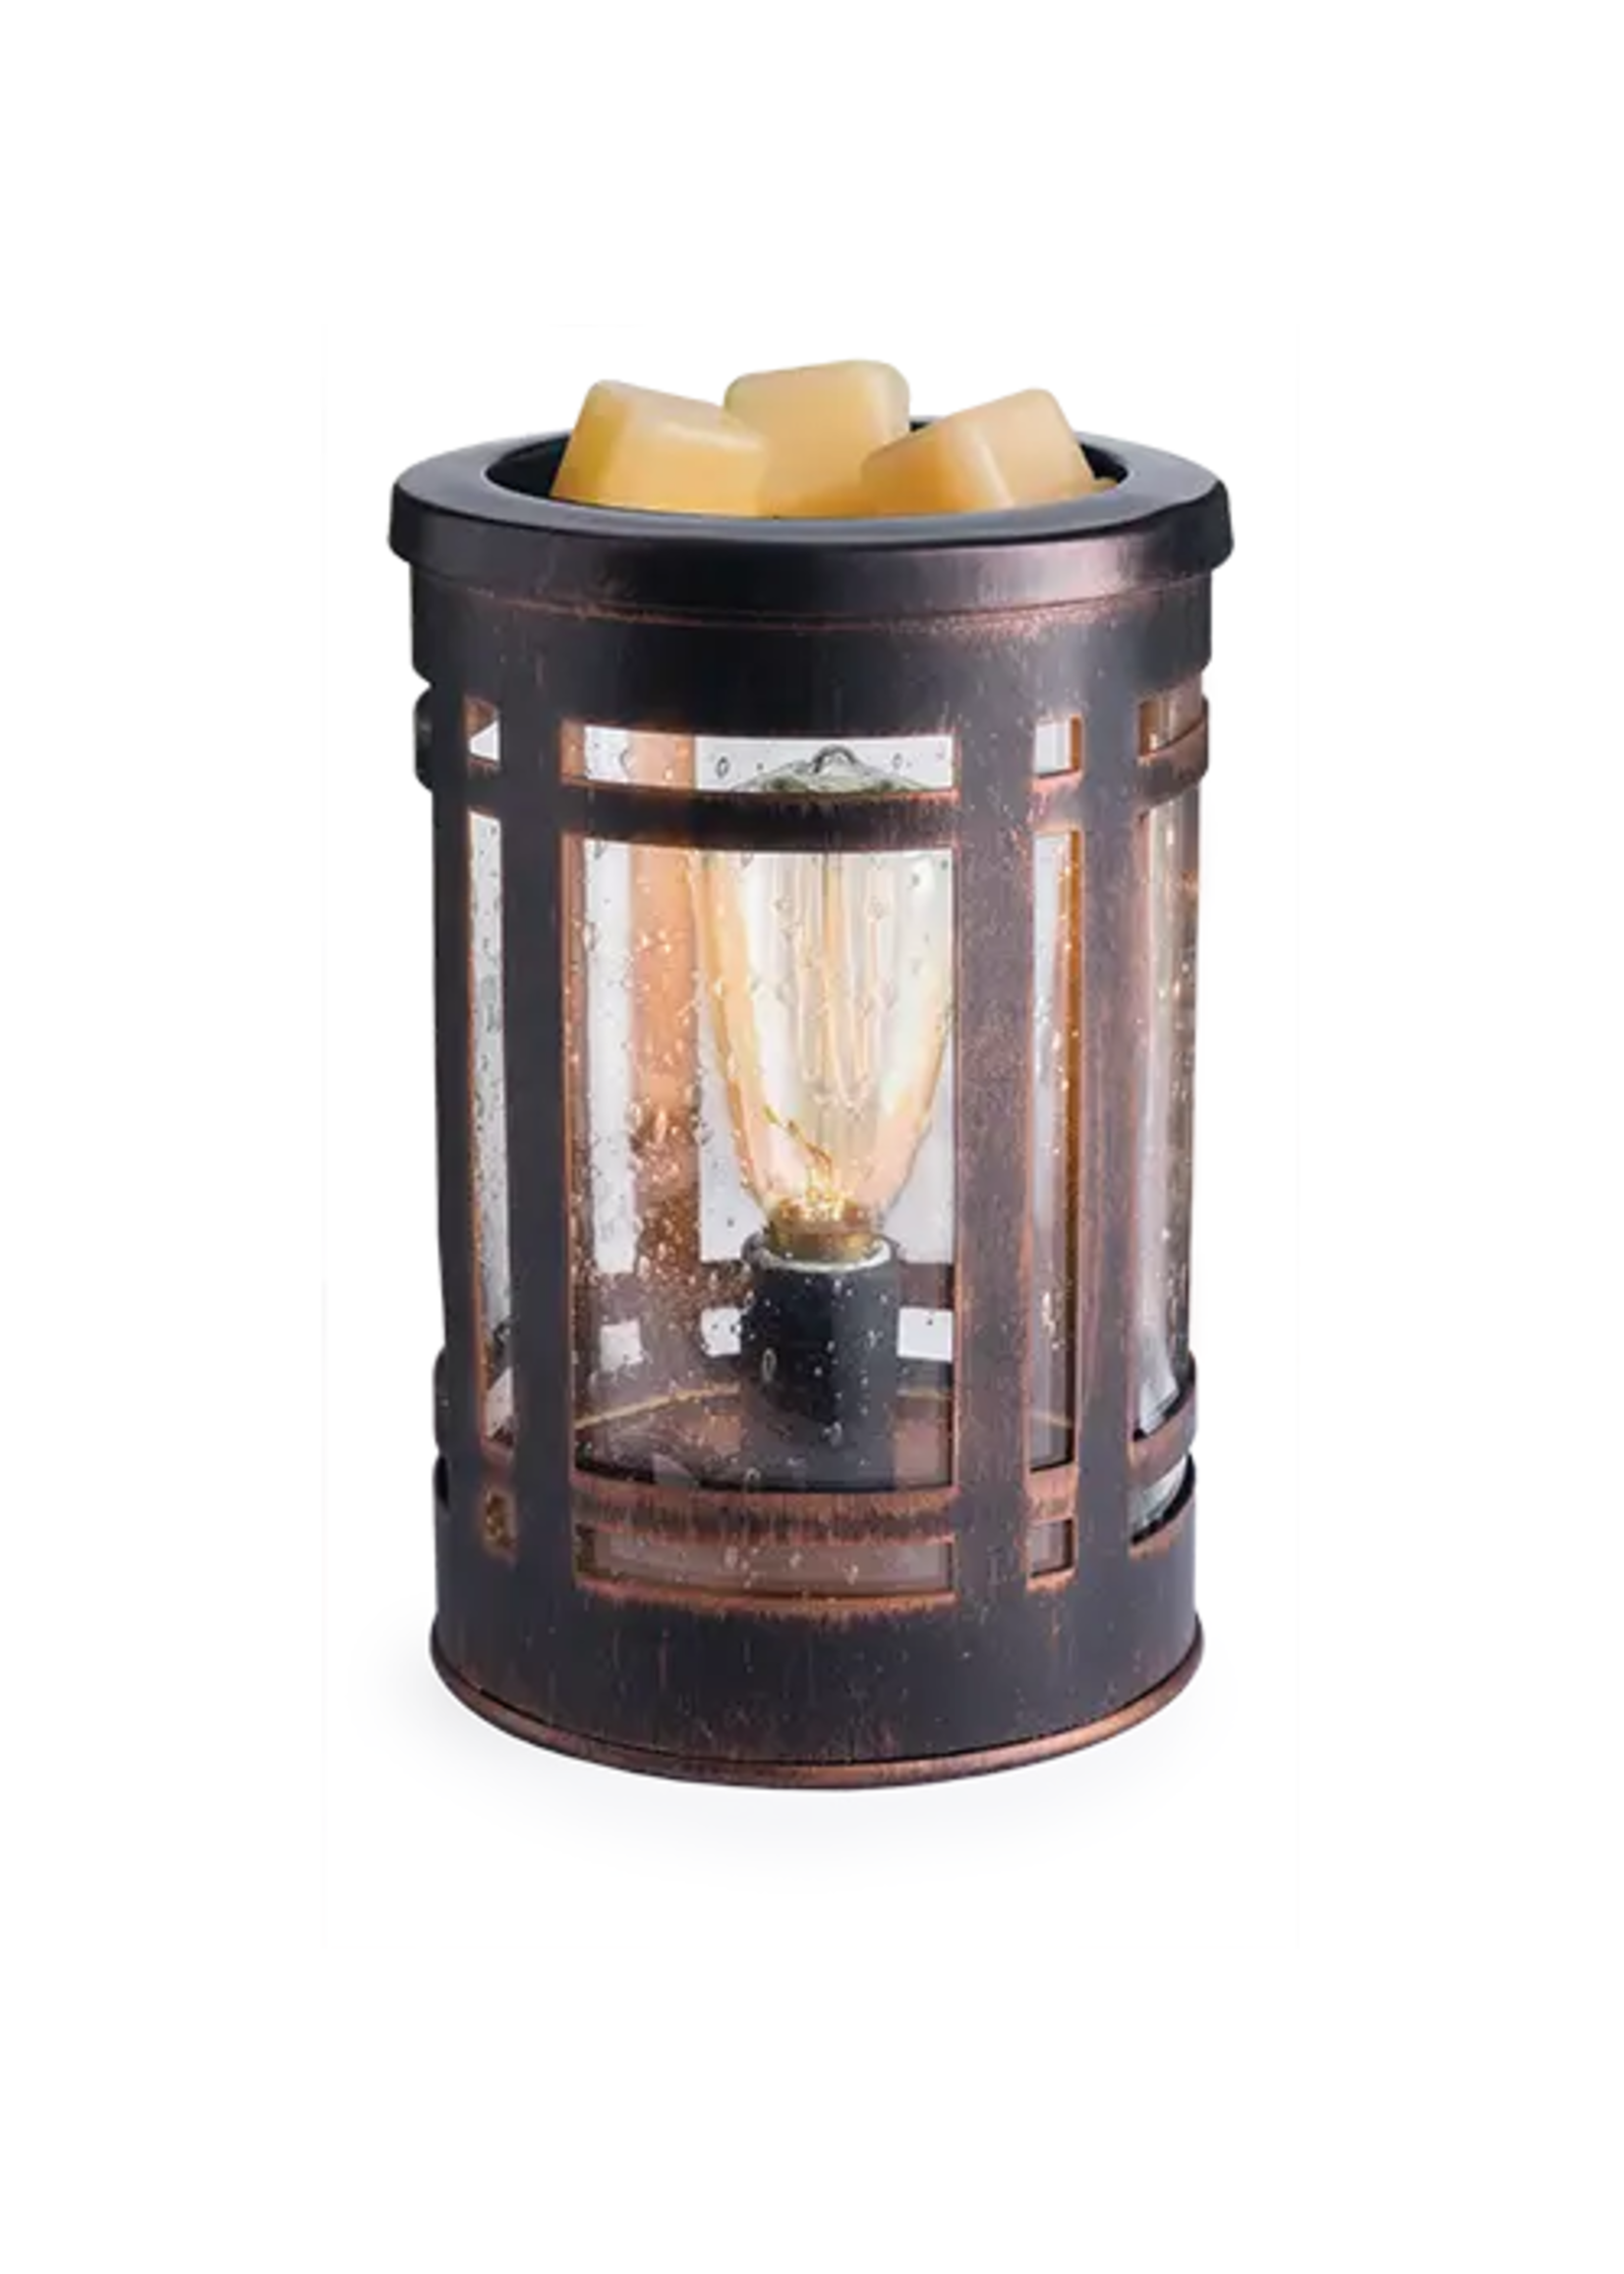 Wax Apothecary Old World Edison Bulb Wax Melter & Candle Warmer